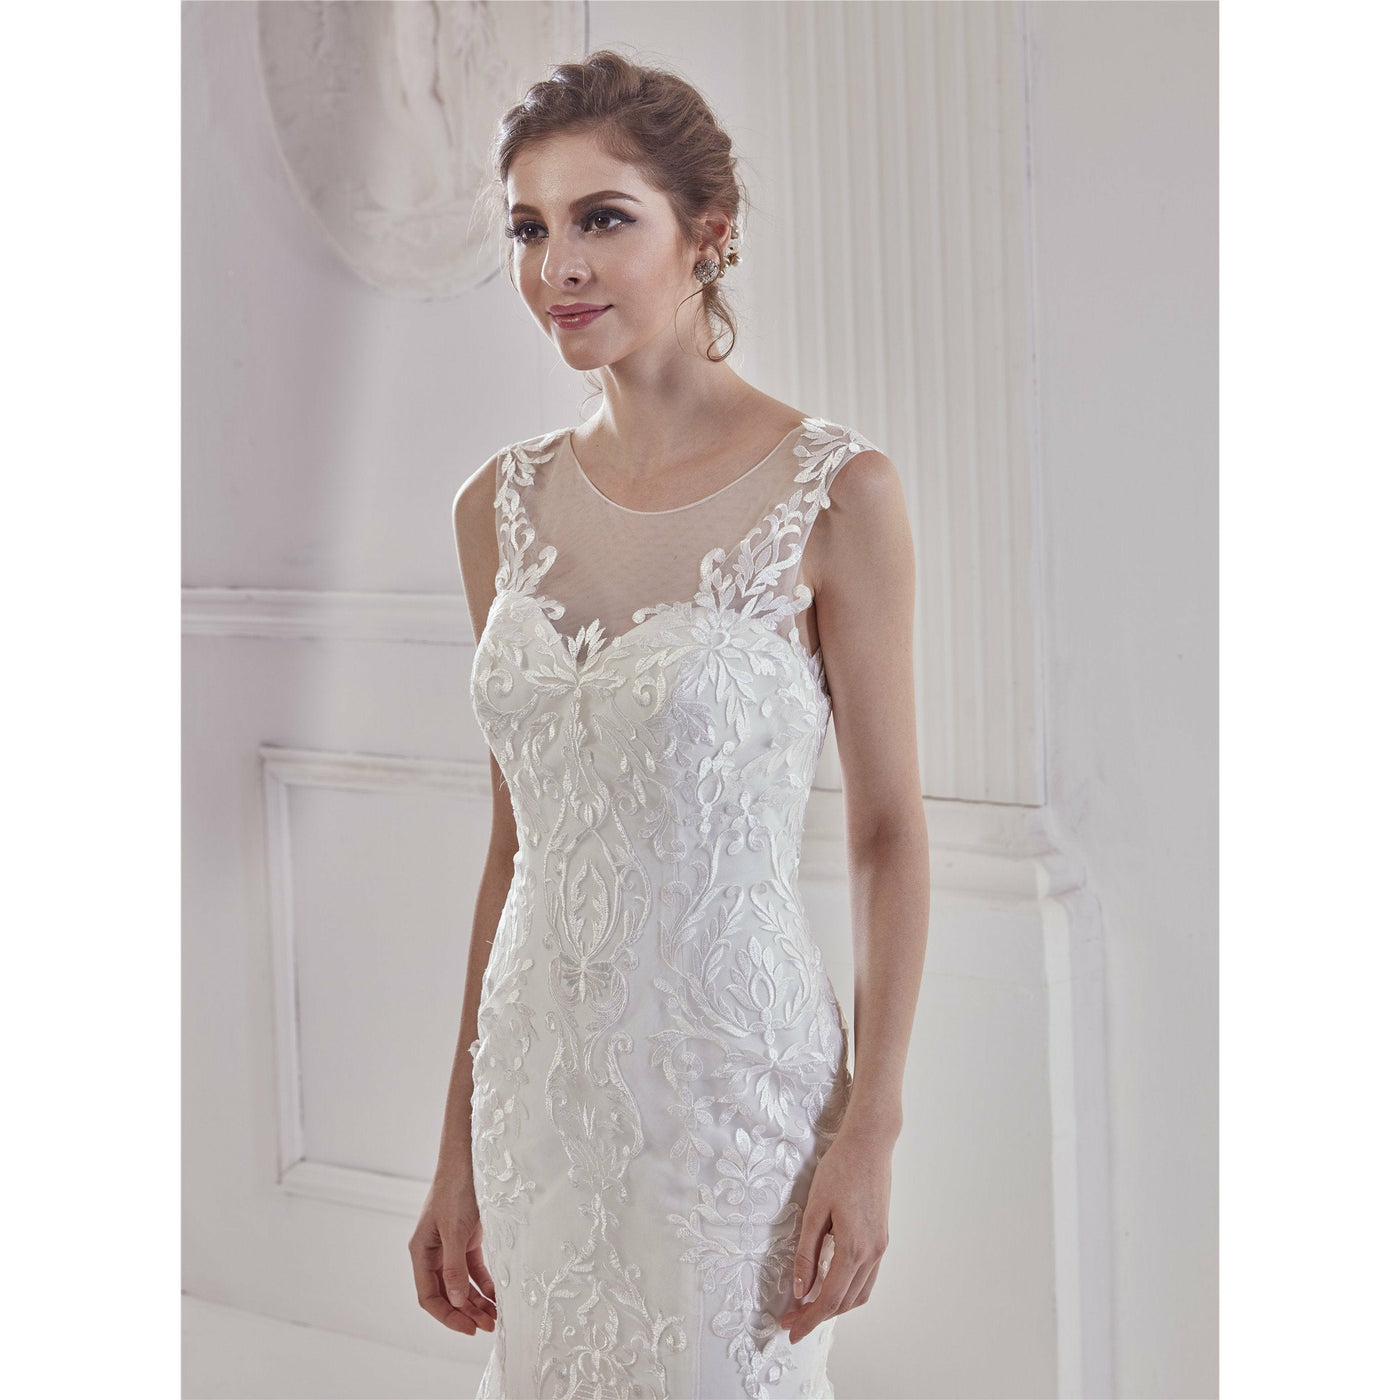 Chicely Illusion sweetheart allover lace mermaid wedding dress1